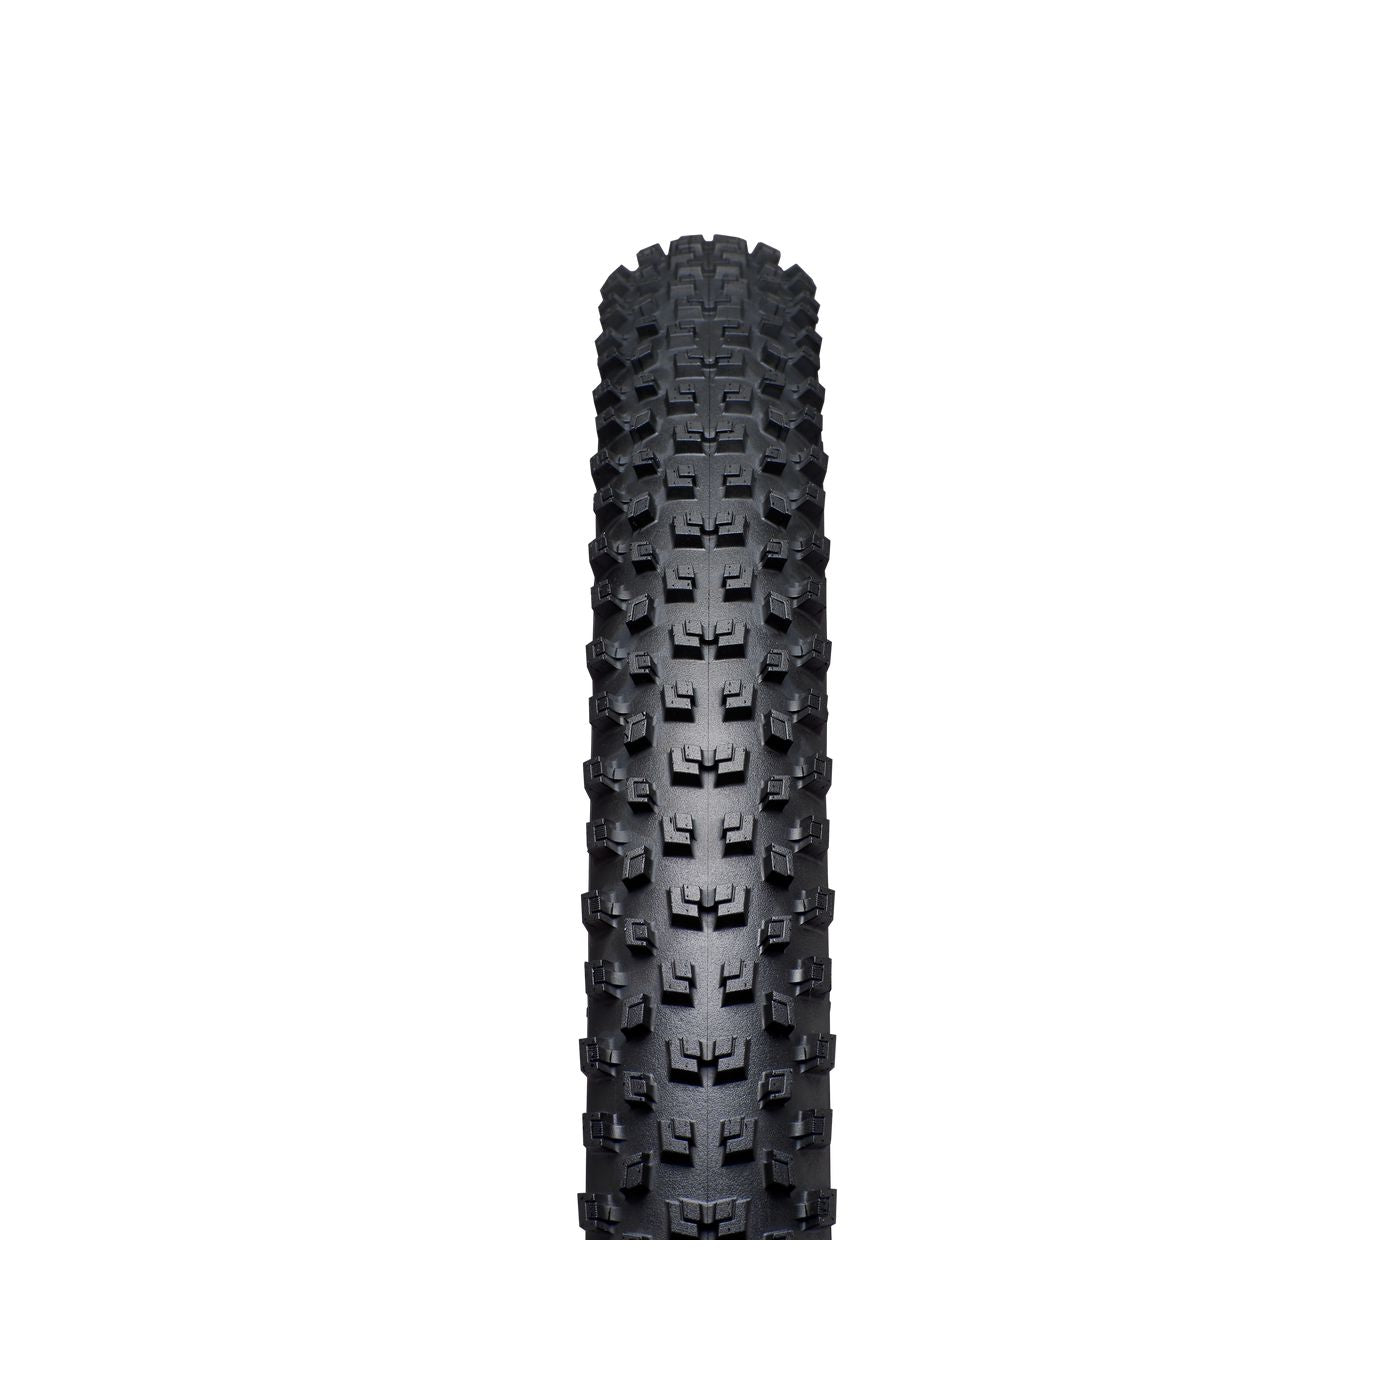 Specialized Ground Control Grid 2Bliss Ready T7 26" Bike Tire - Tires - Bicycle Warehouse